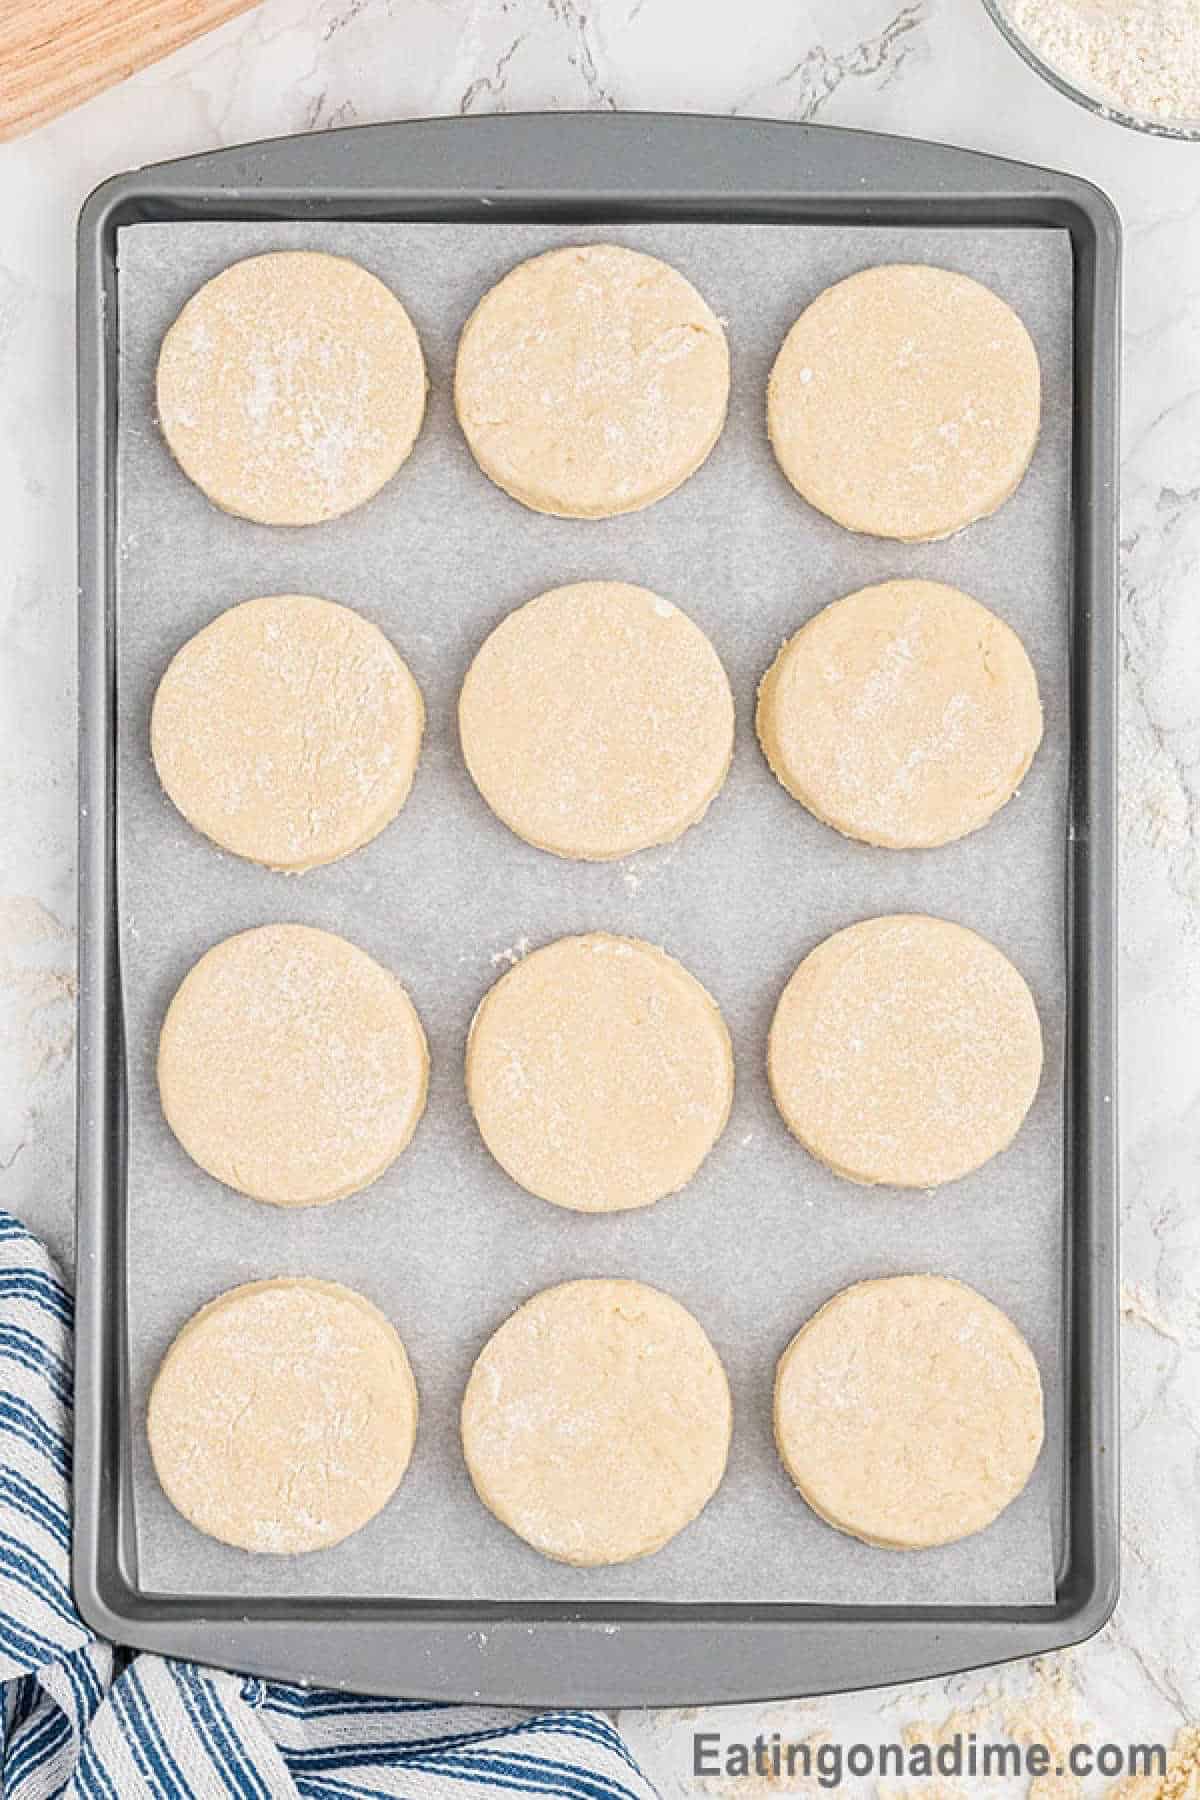 Biscuit dough on a baking sheet